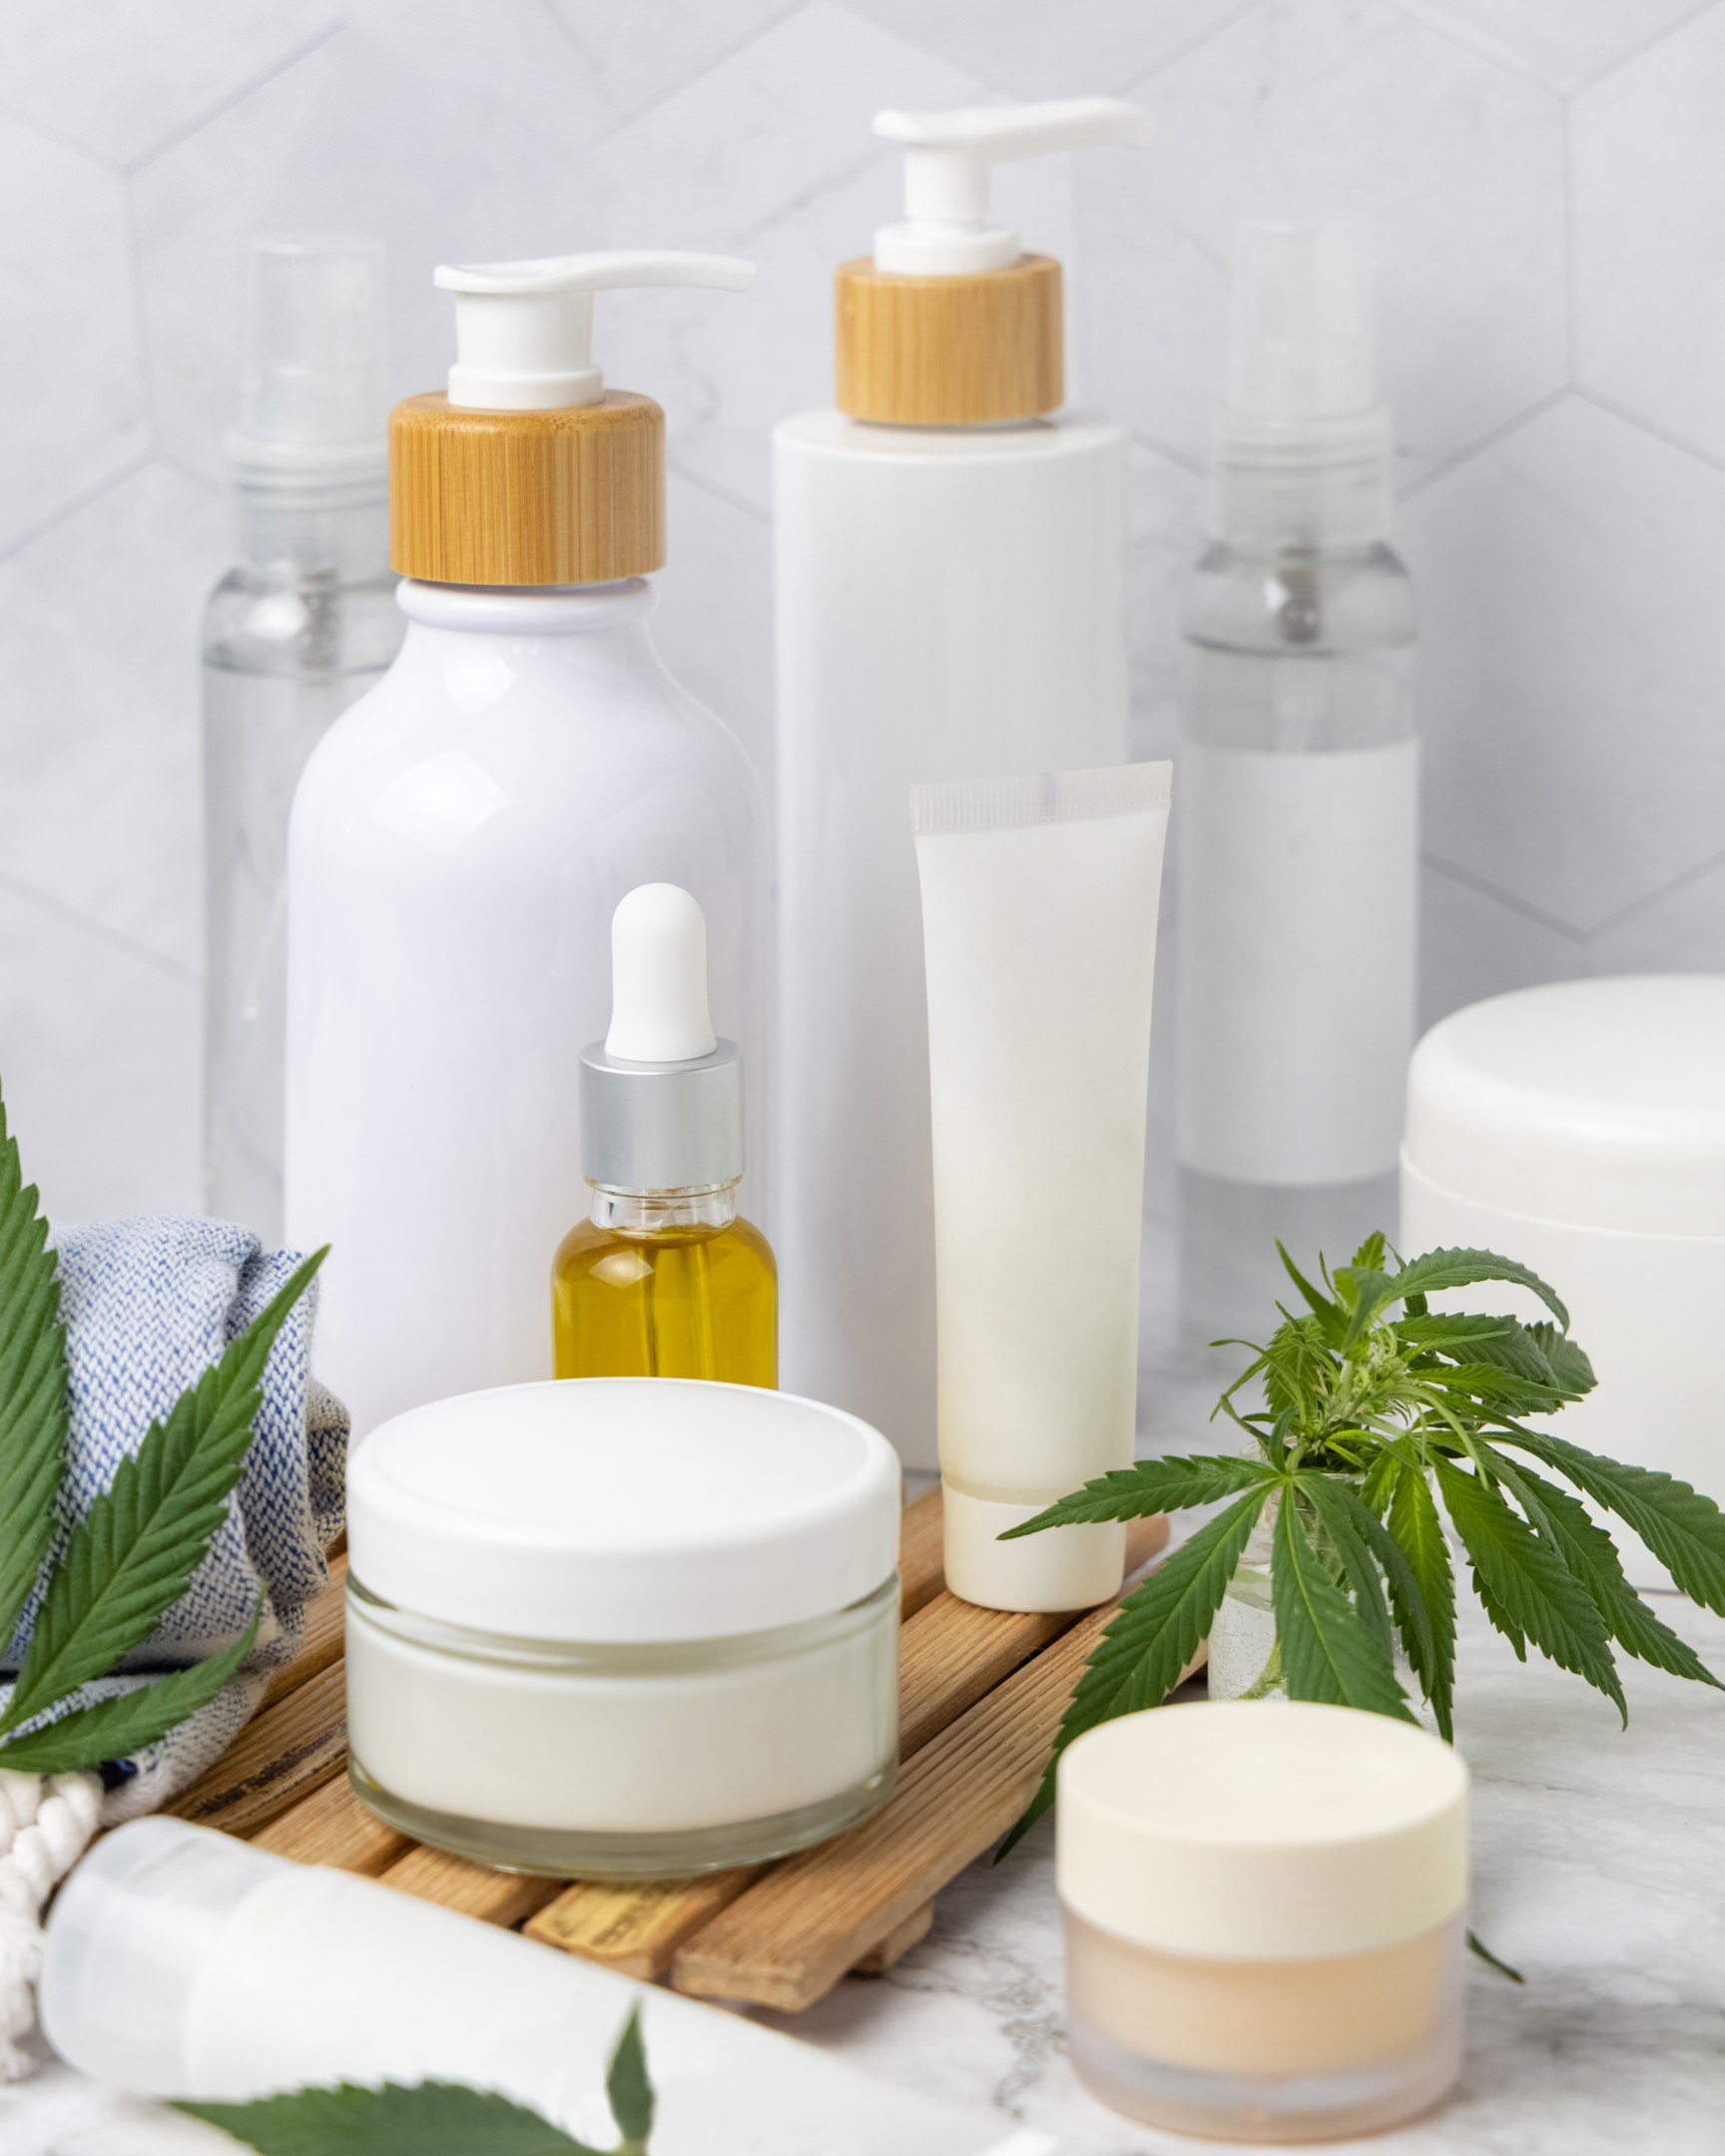 Top 10 High Potency CBD Products